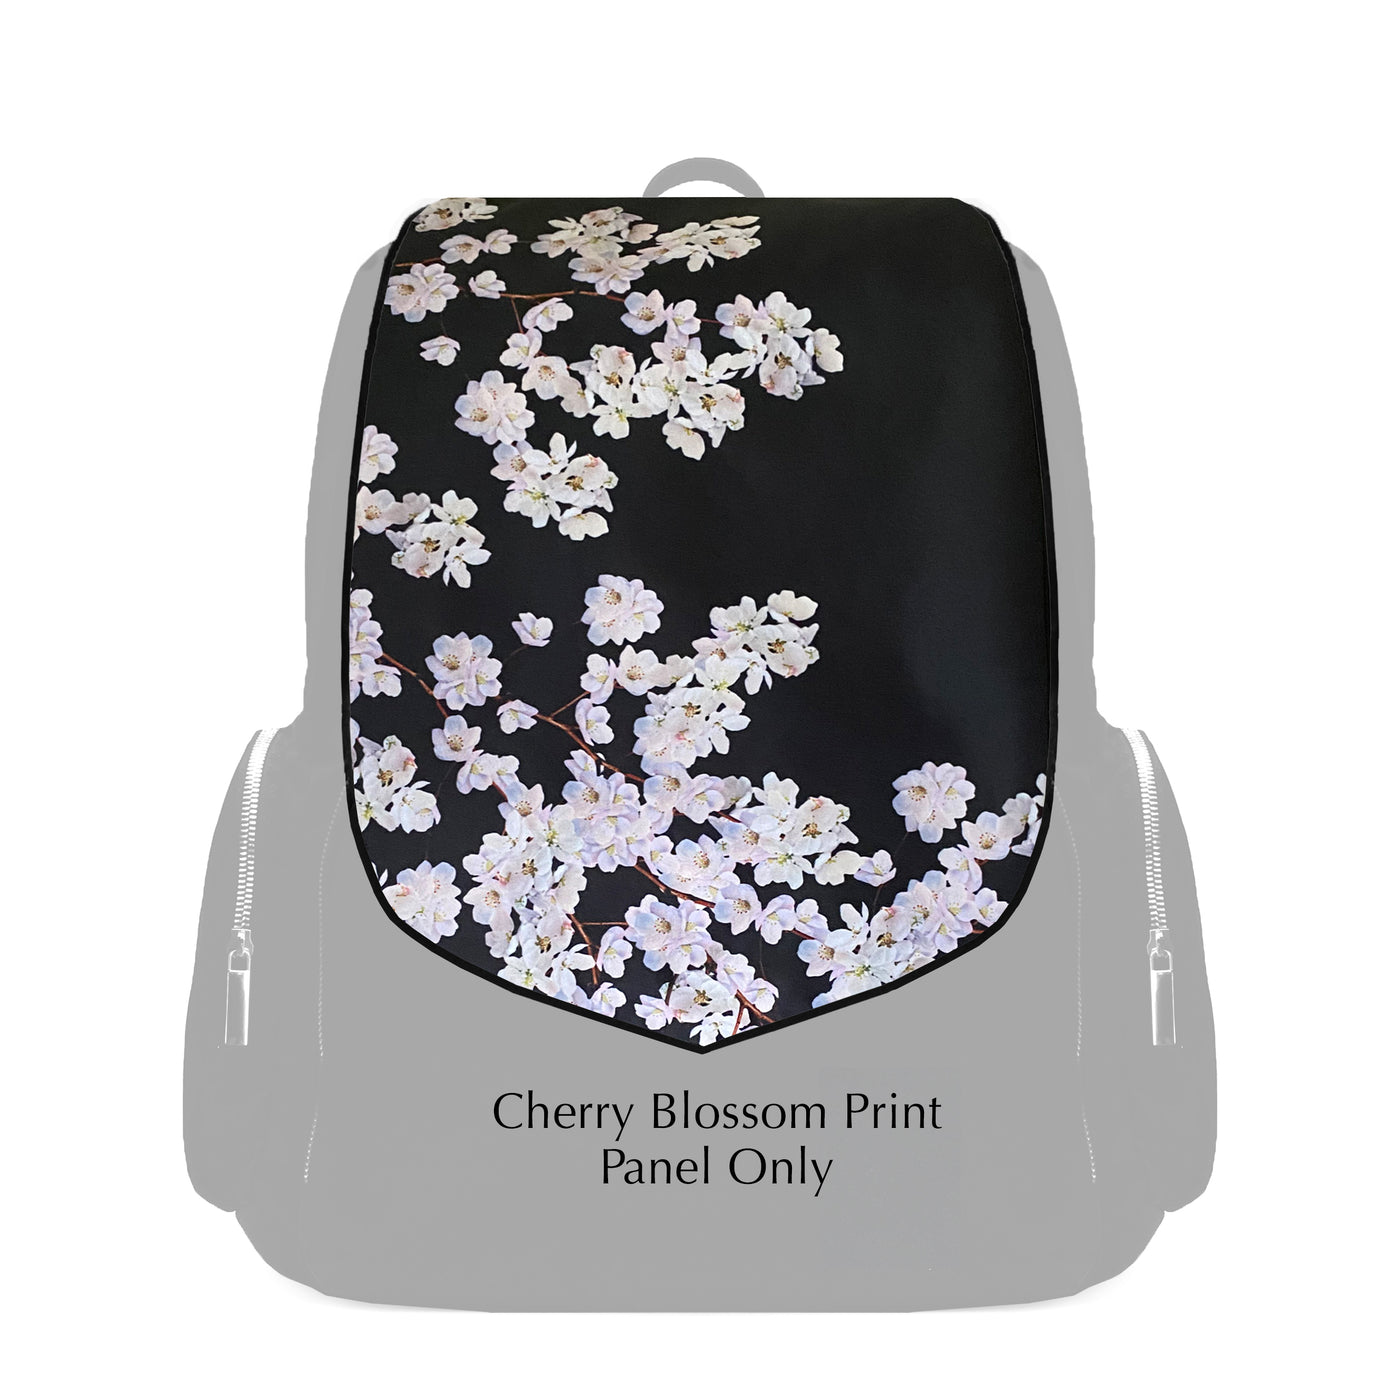 Panel Only in Cherry Blossom Print